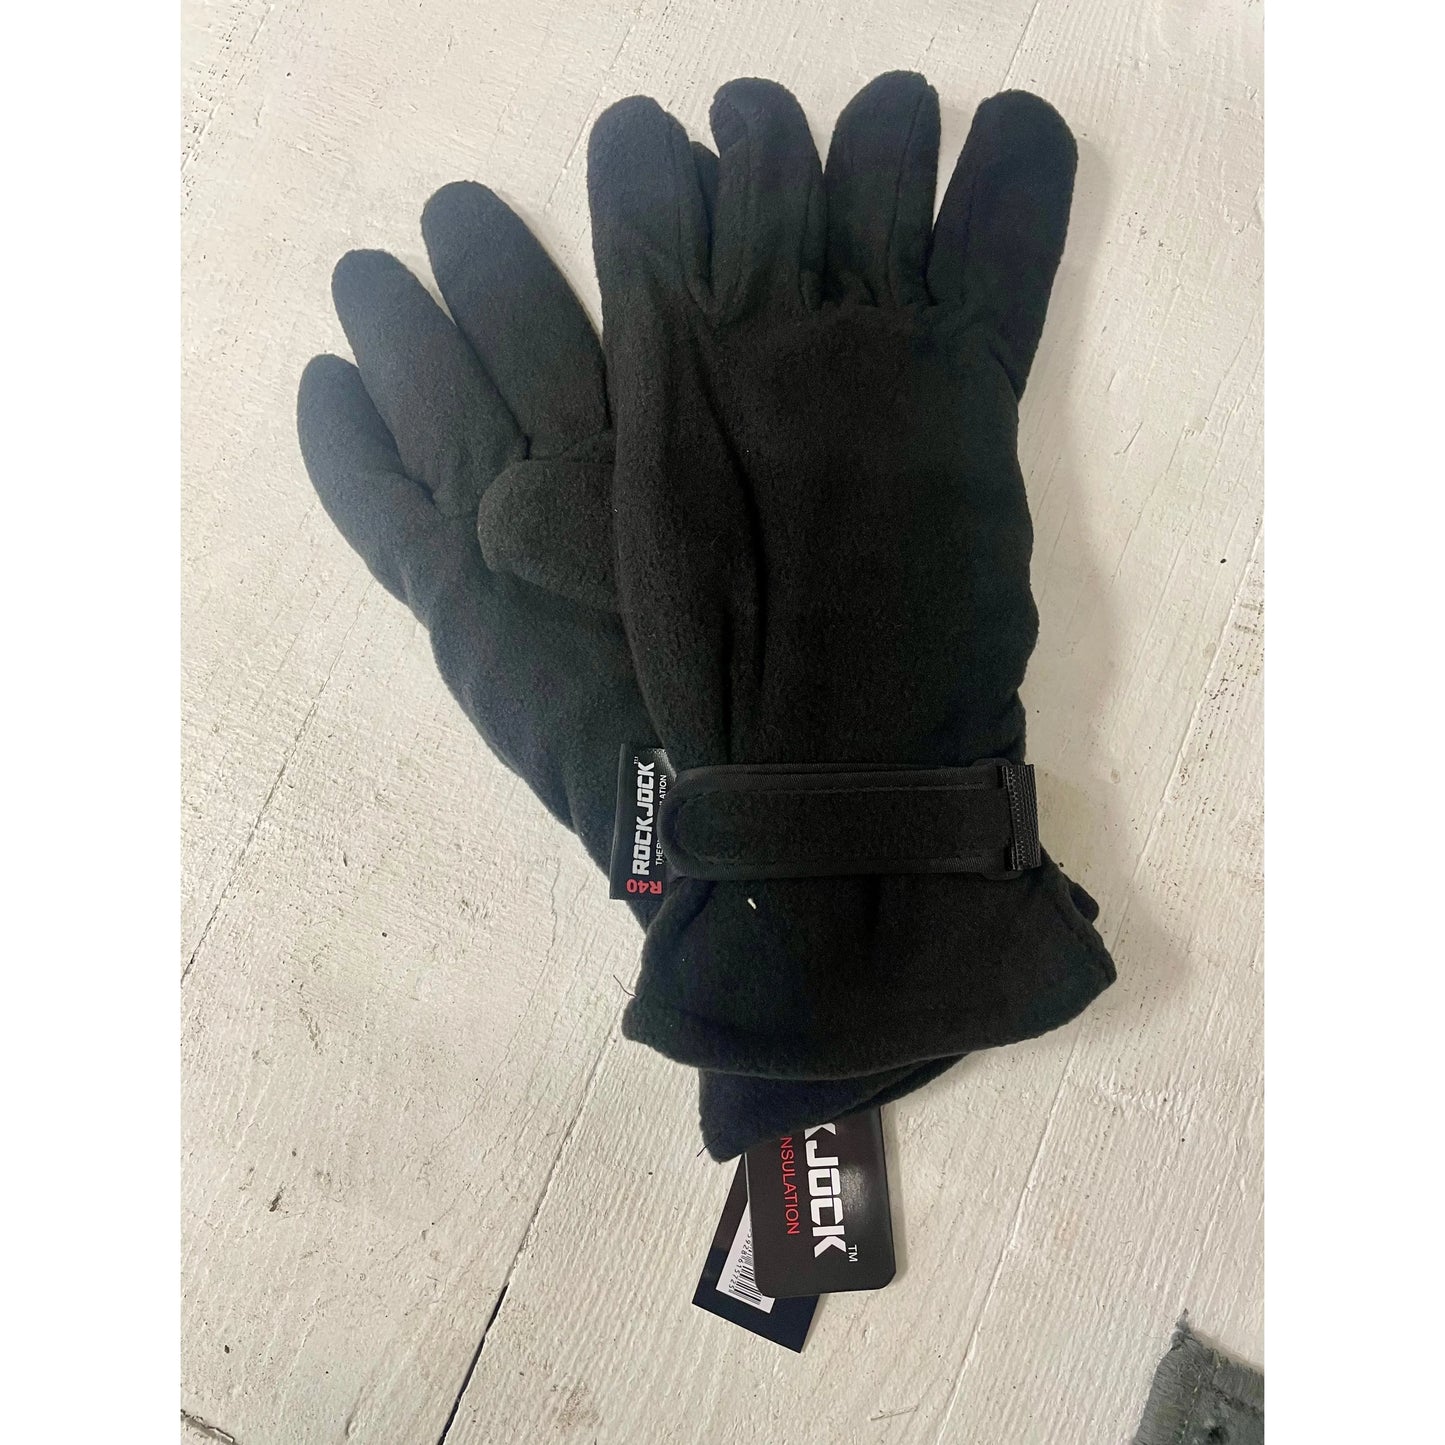 Mens Thermal Insulated Gloves in Black